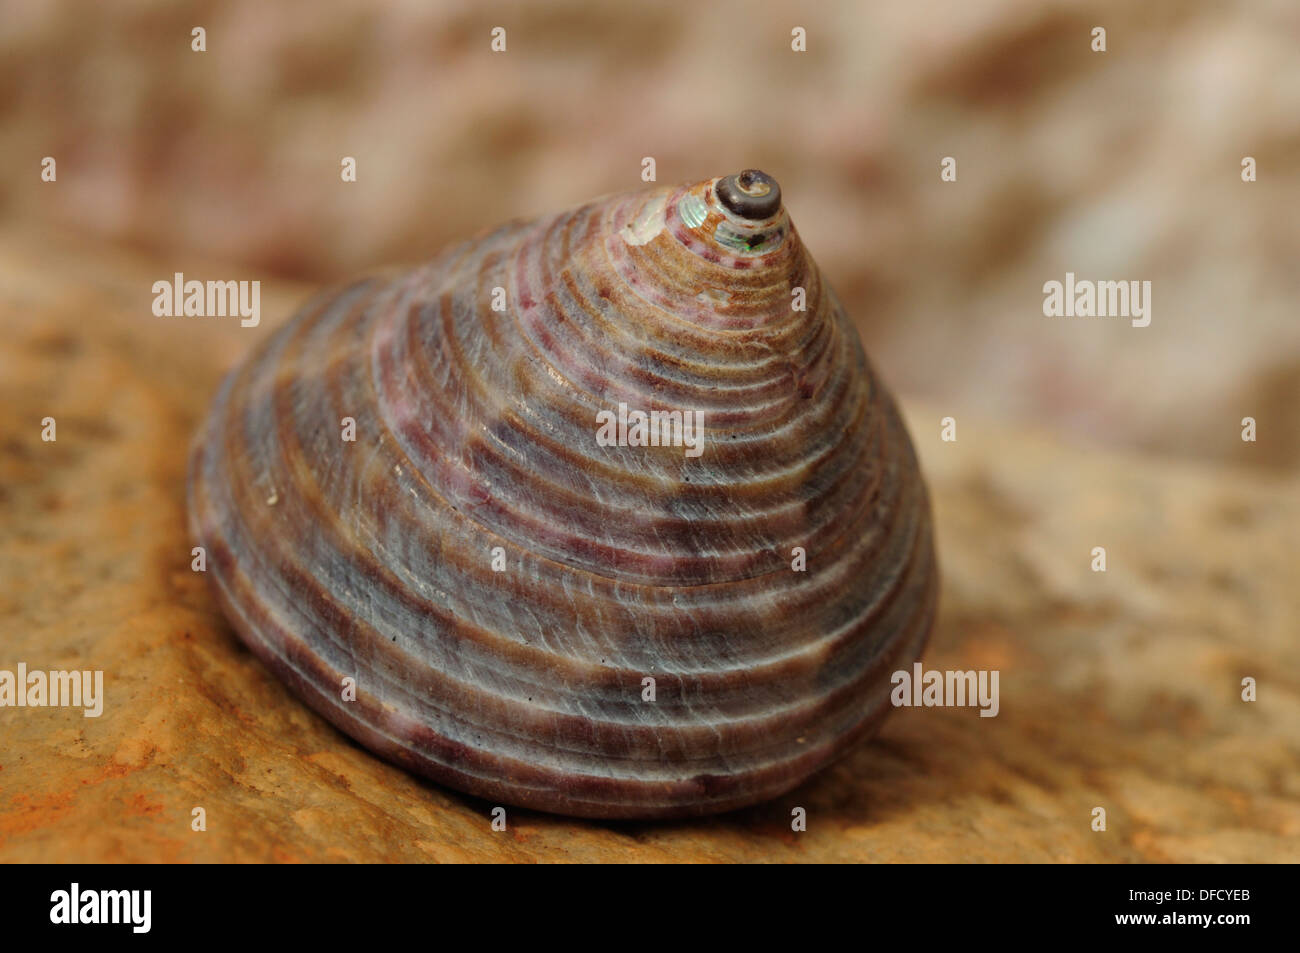 Conical shell of the sea snail Calliostoma zizyphinum Stock Photo